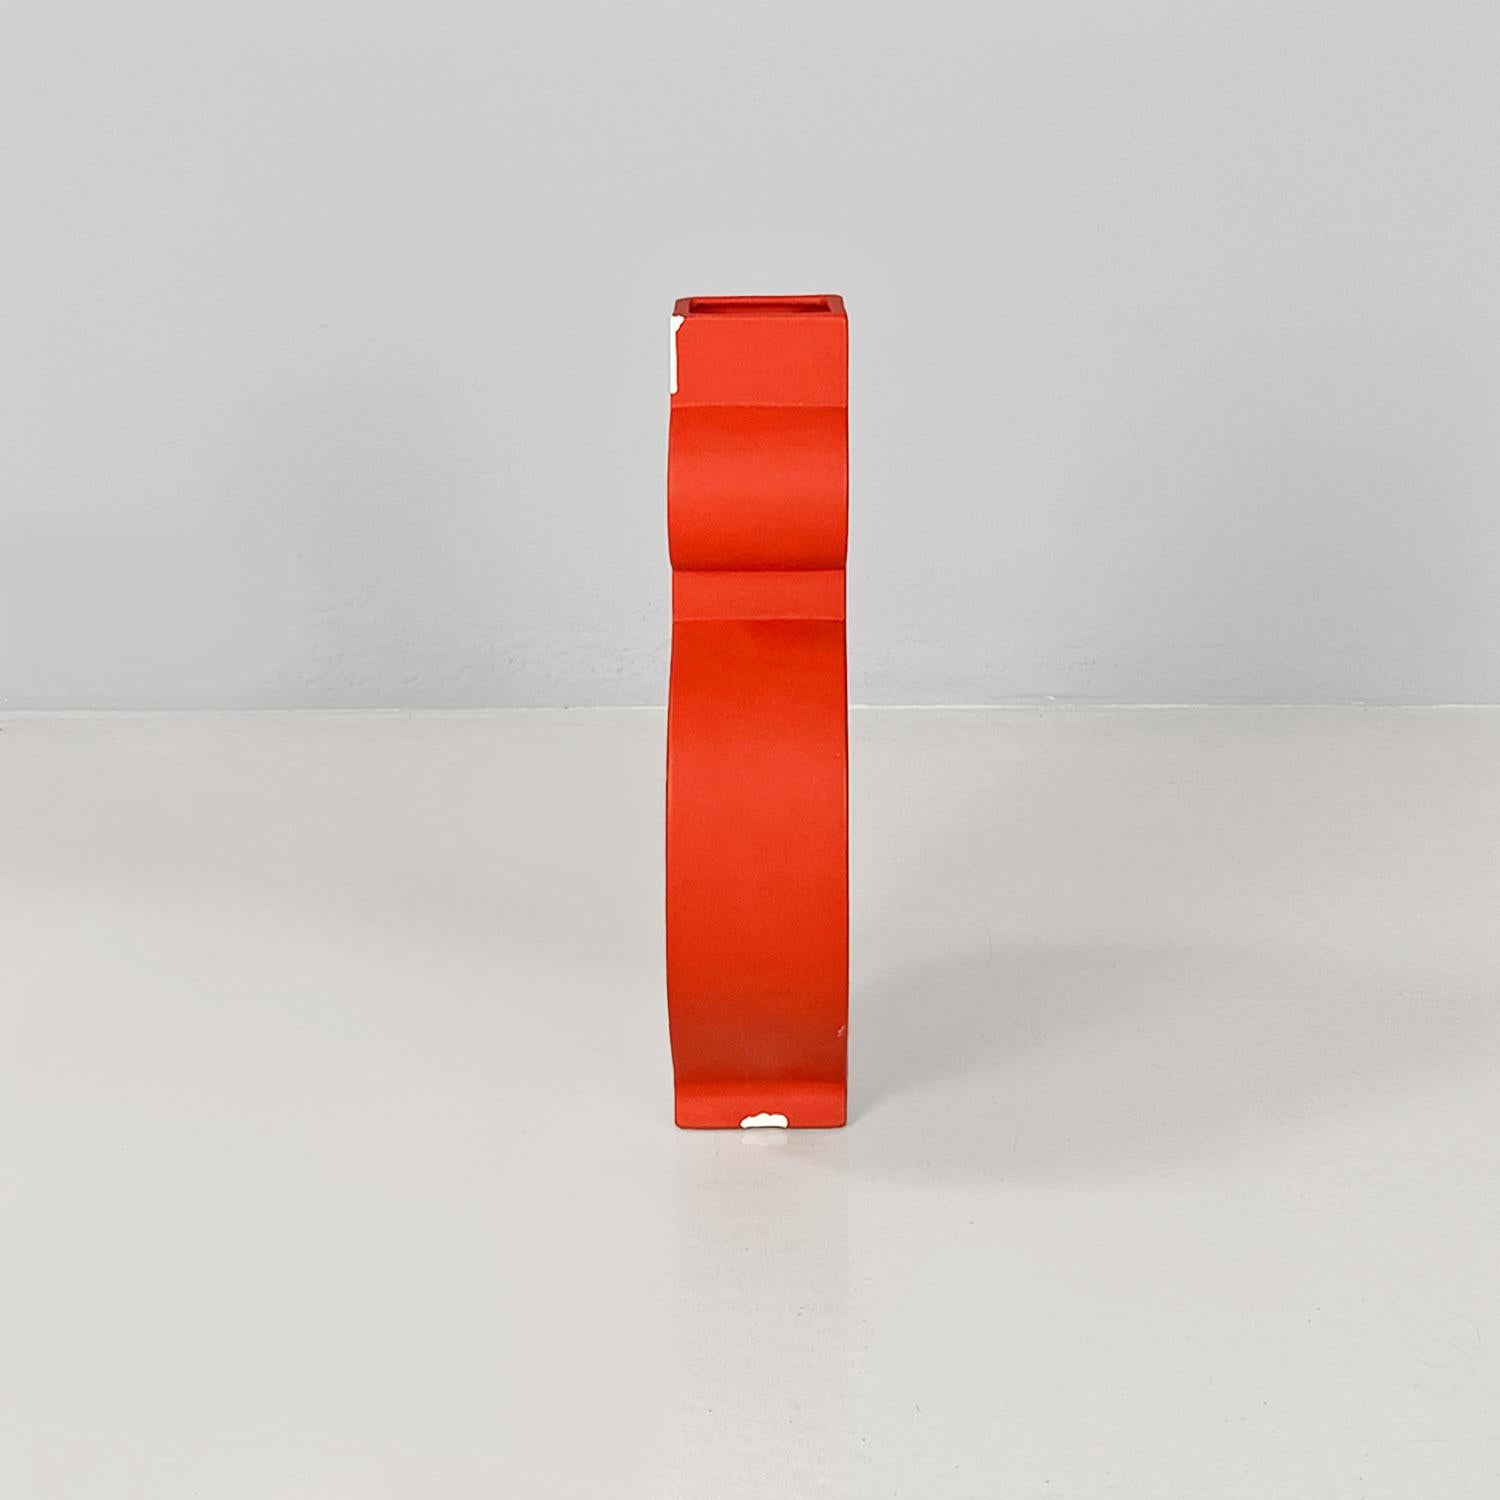 Sculpture entitled Picassa in bright red painted ceramic with a matte finish. The subject of the sculpture is geometric and rounded, with a round hole in the middle. The sculpture can also be used as a vase as it has a square hole in the upper